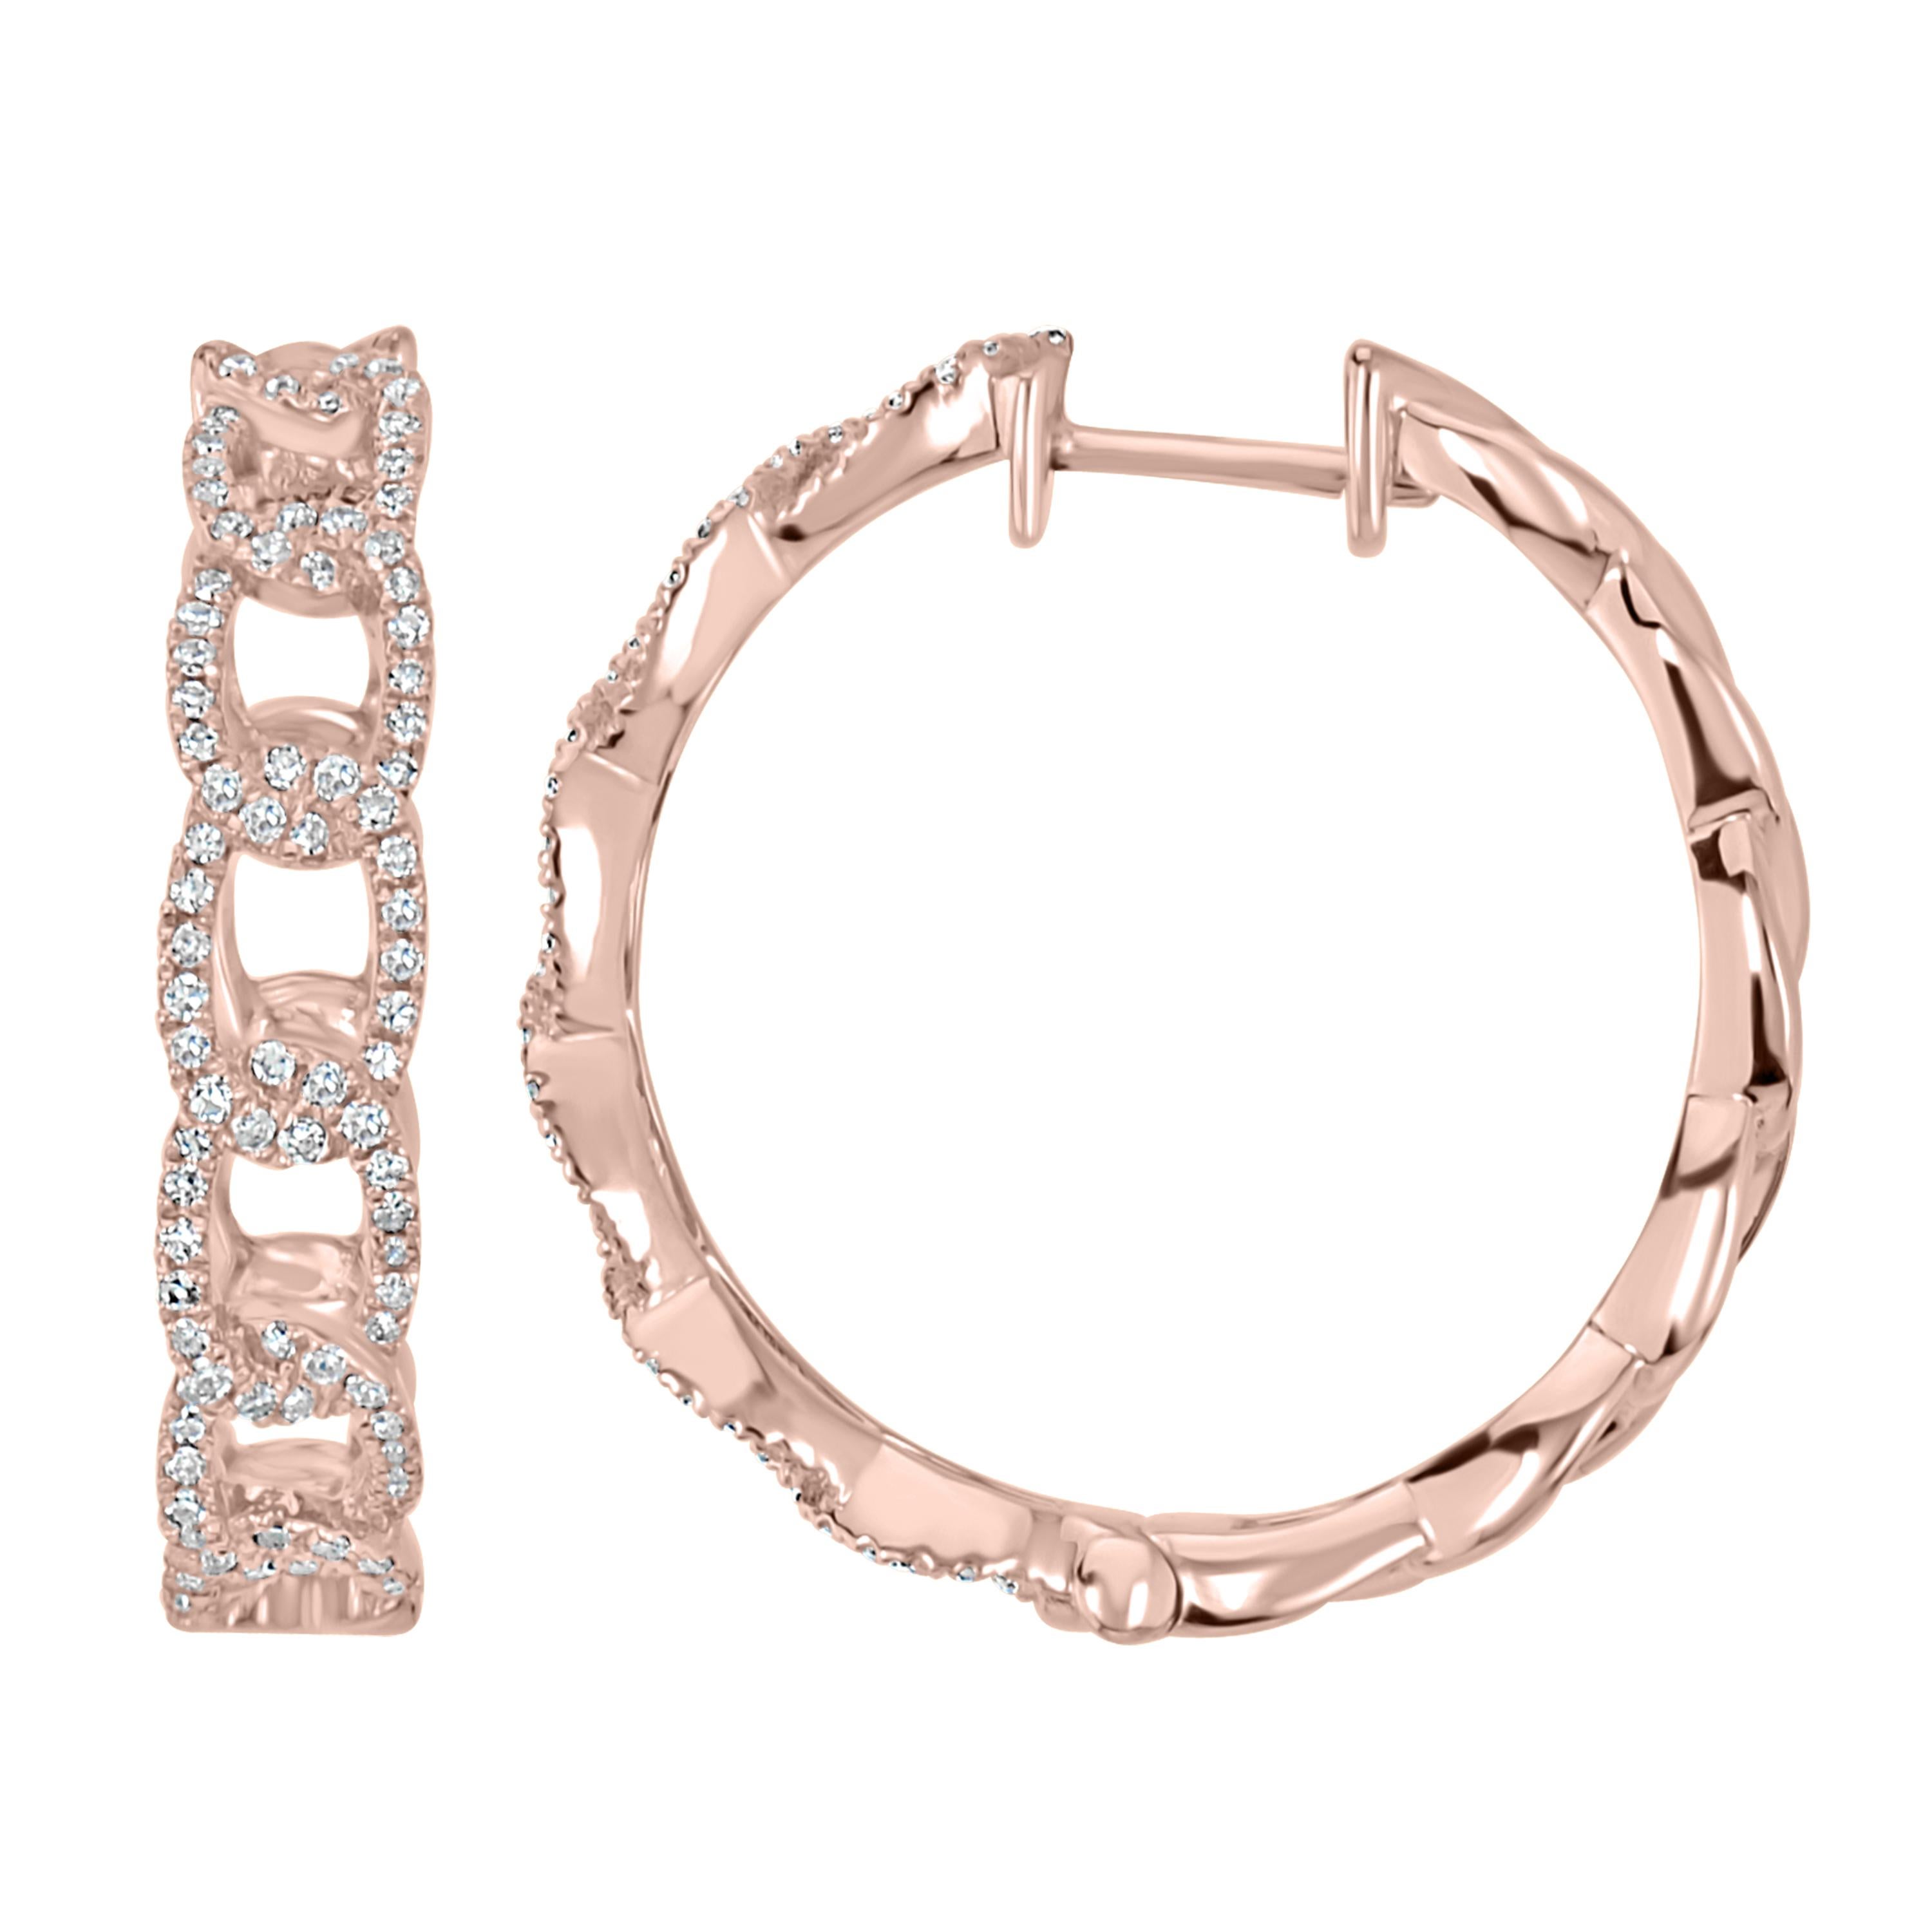 Luxle 0.43 Cttw. Pave Round Diamond Link Hoop Earrings in 18k Rose Gold In New Condition For Sale In New York, NY